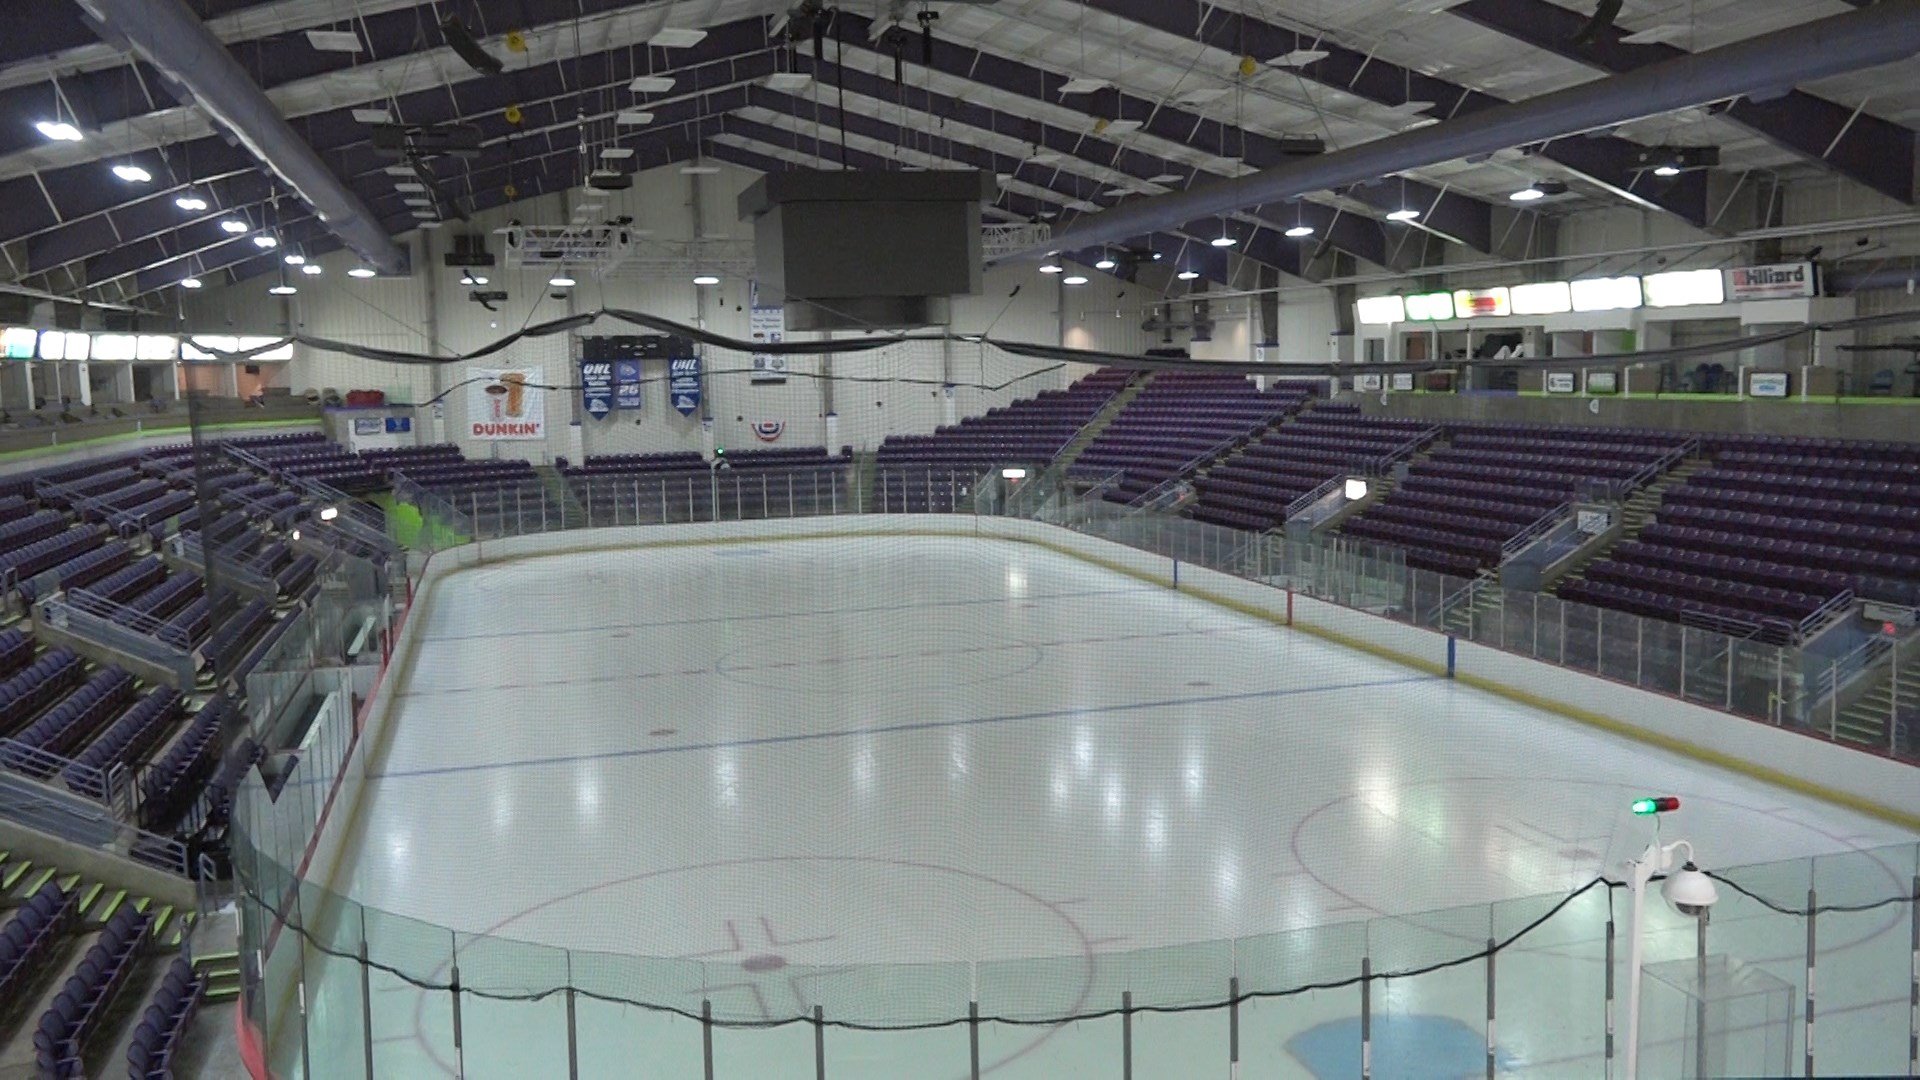 first-arena-shows-off-improvements-prepares-to-welcome-elmira-college